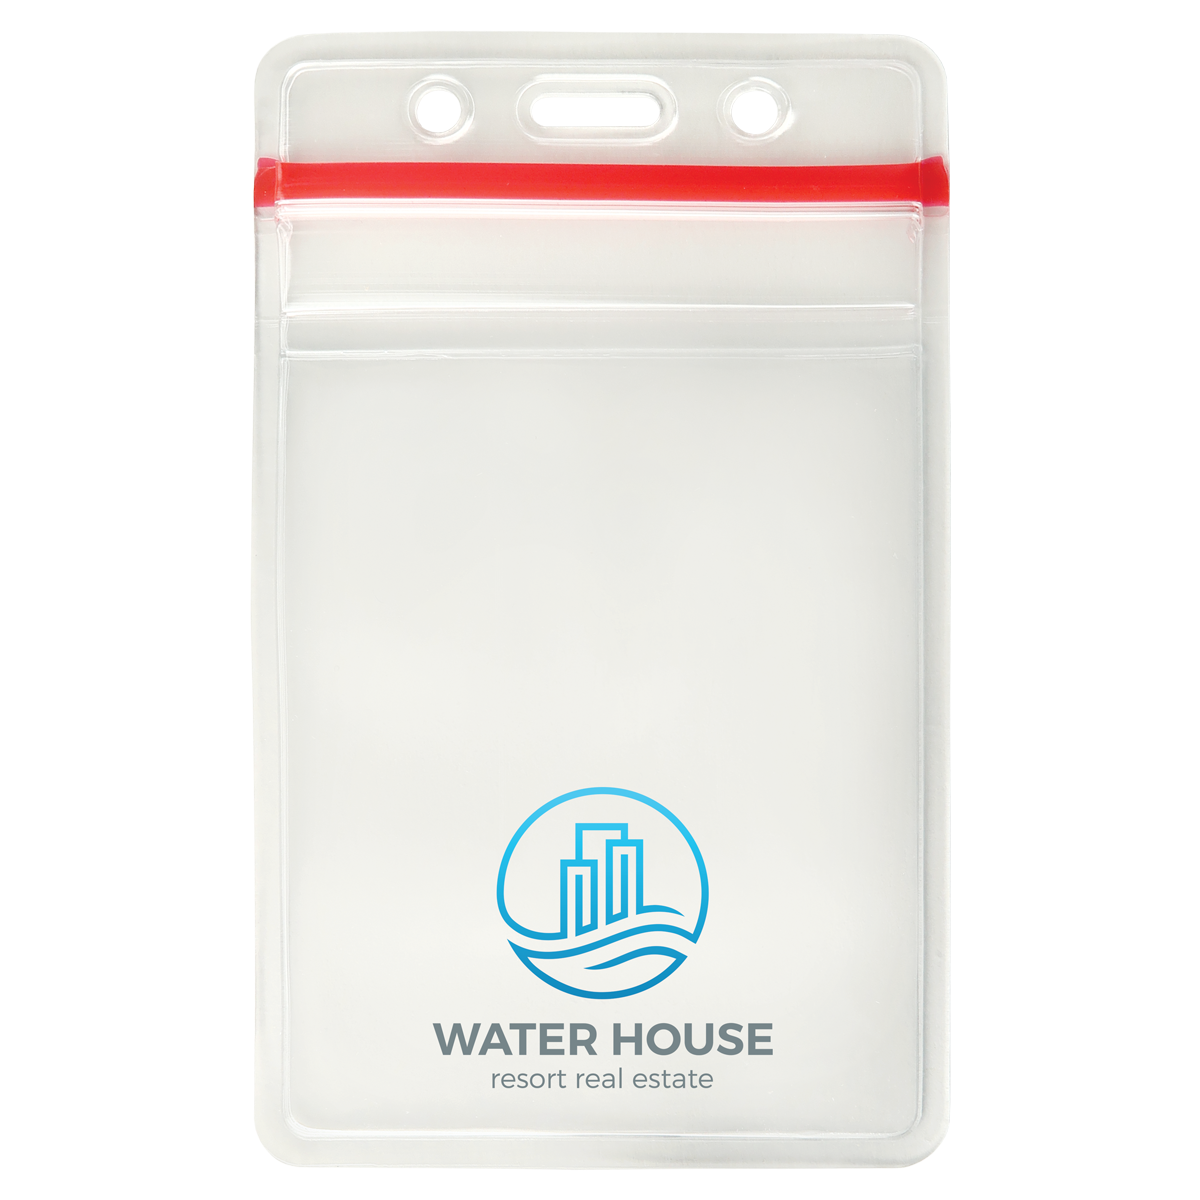 A Custom Heavy Duty Vinyl Vertical Badge Holder w/ Resealable Zip Top (1815-1110) with a red seal at the top, featuring the logo and text "Water House Resort Real Estate" on the front. The logo includes an illustration of two buildings over waves, making it perfect for those in need of custom badge holders.